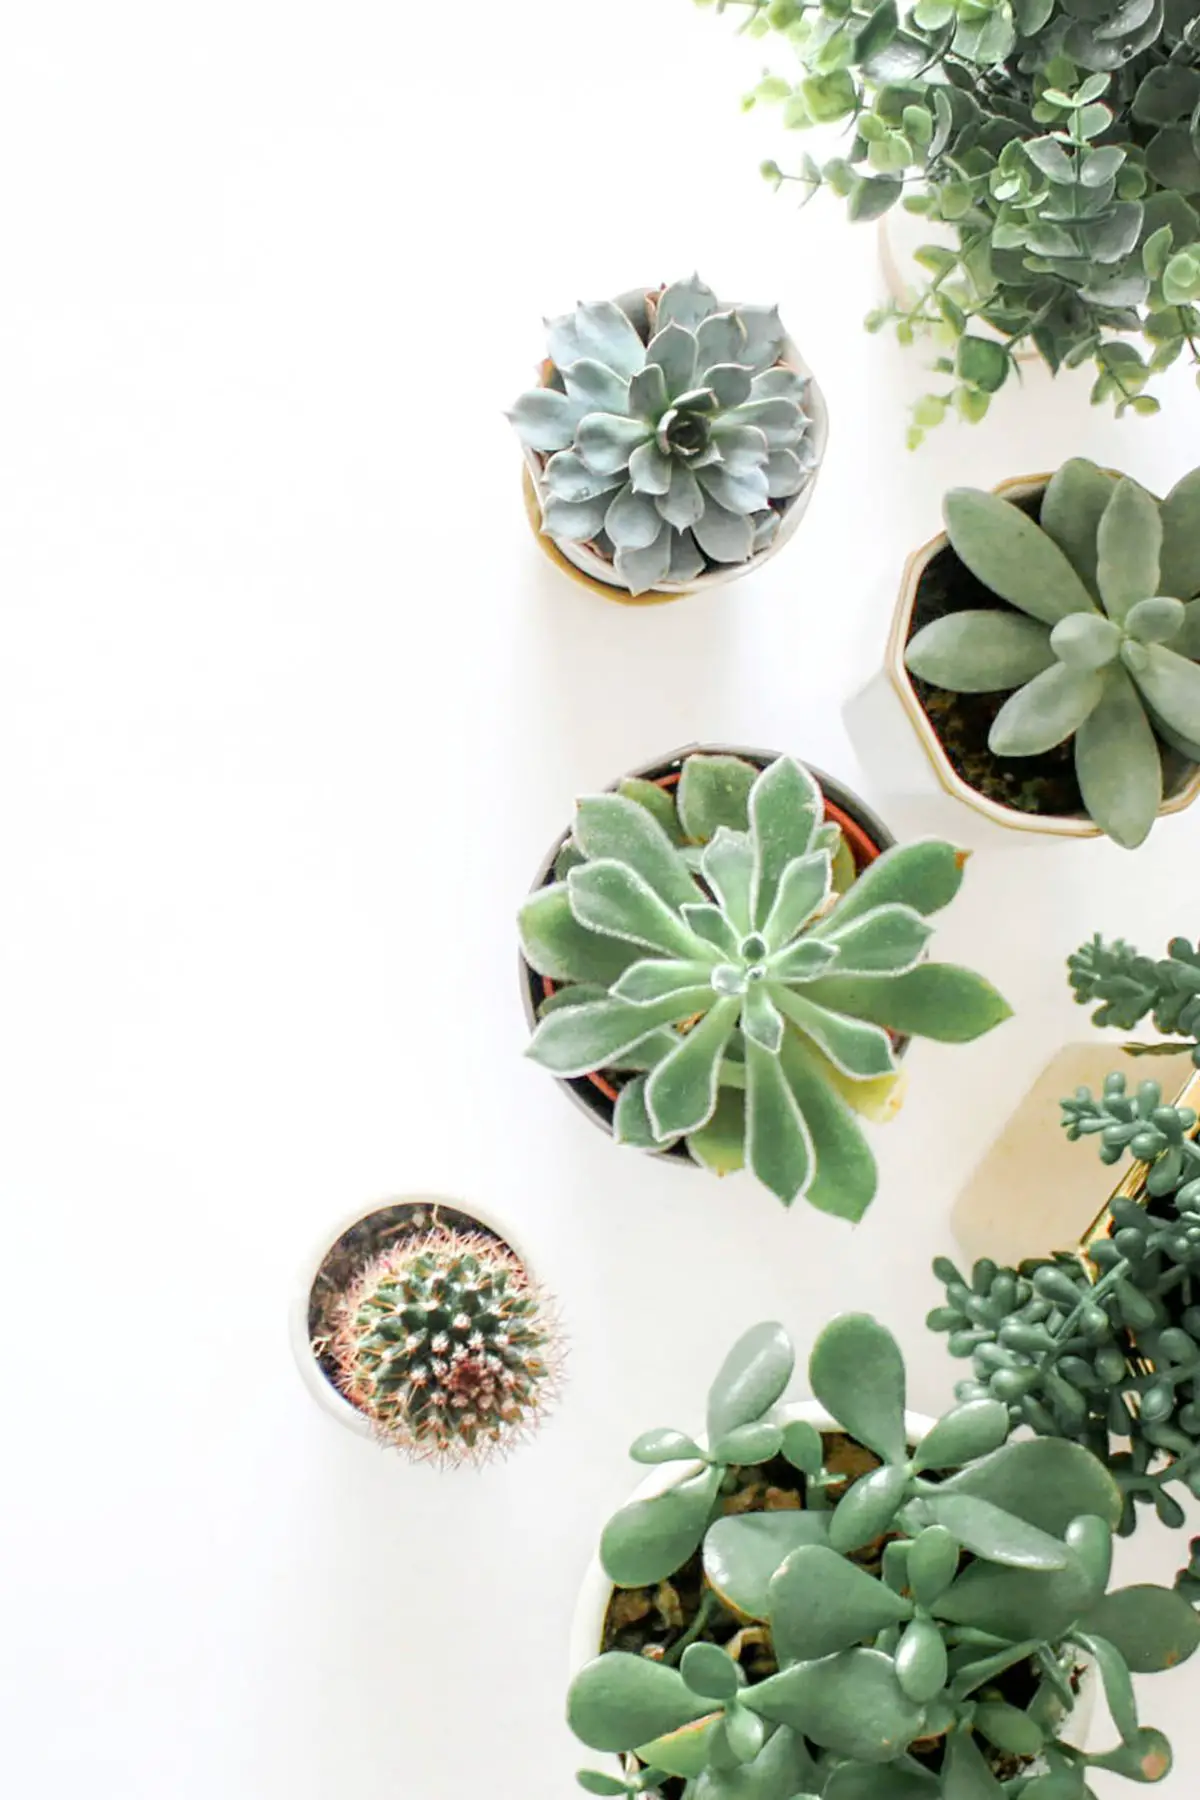 209 Funny Succulent Plant Puns And Jokes That Don’t Succ!